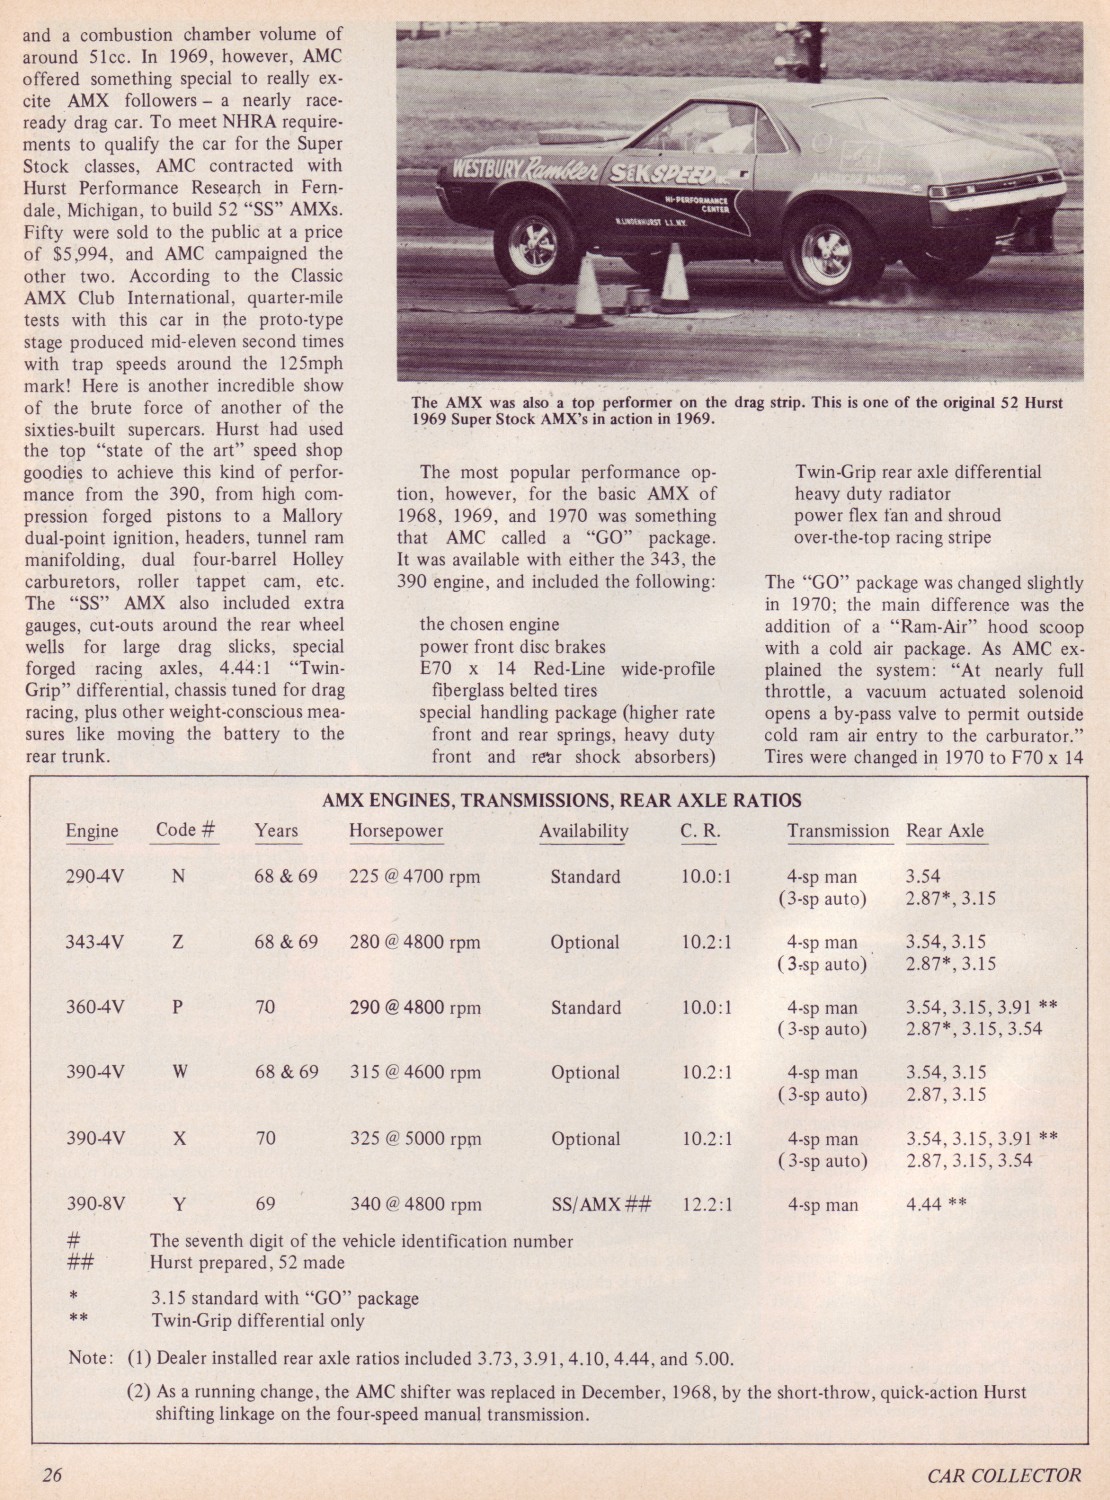 1979-07-carcollector-26-full